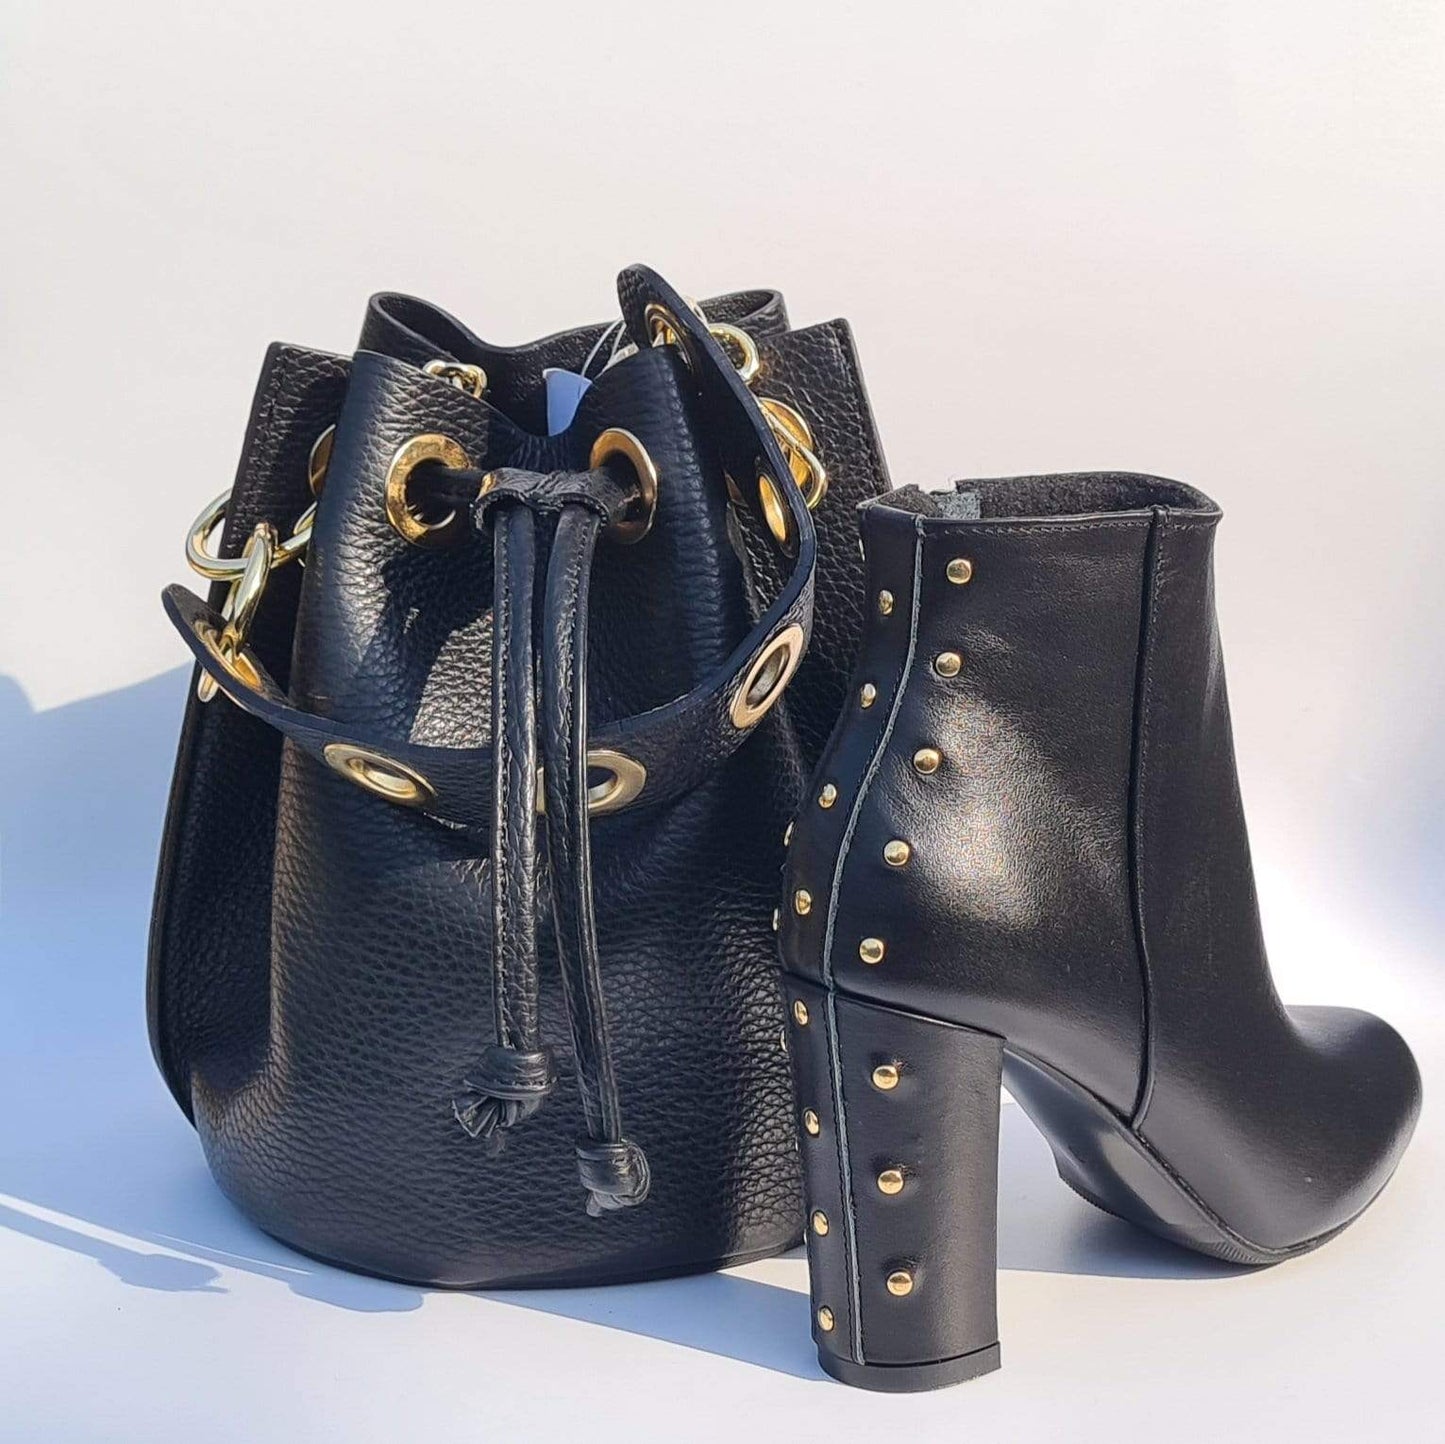 Black leather bucket bag and a matching ladies ankle boot 